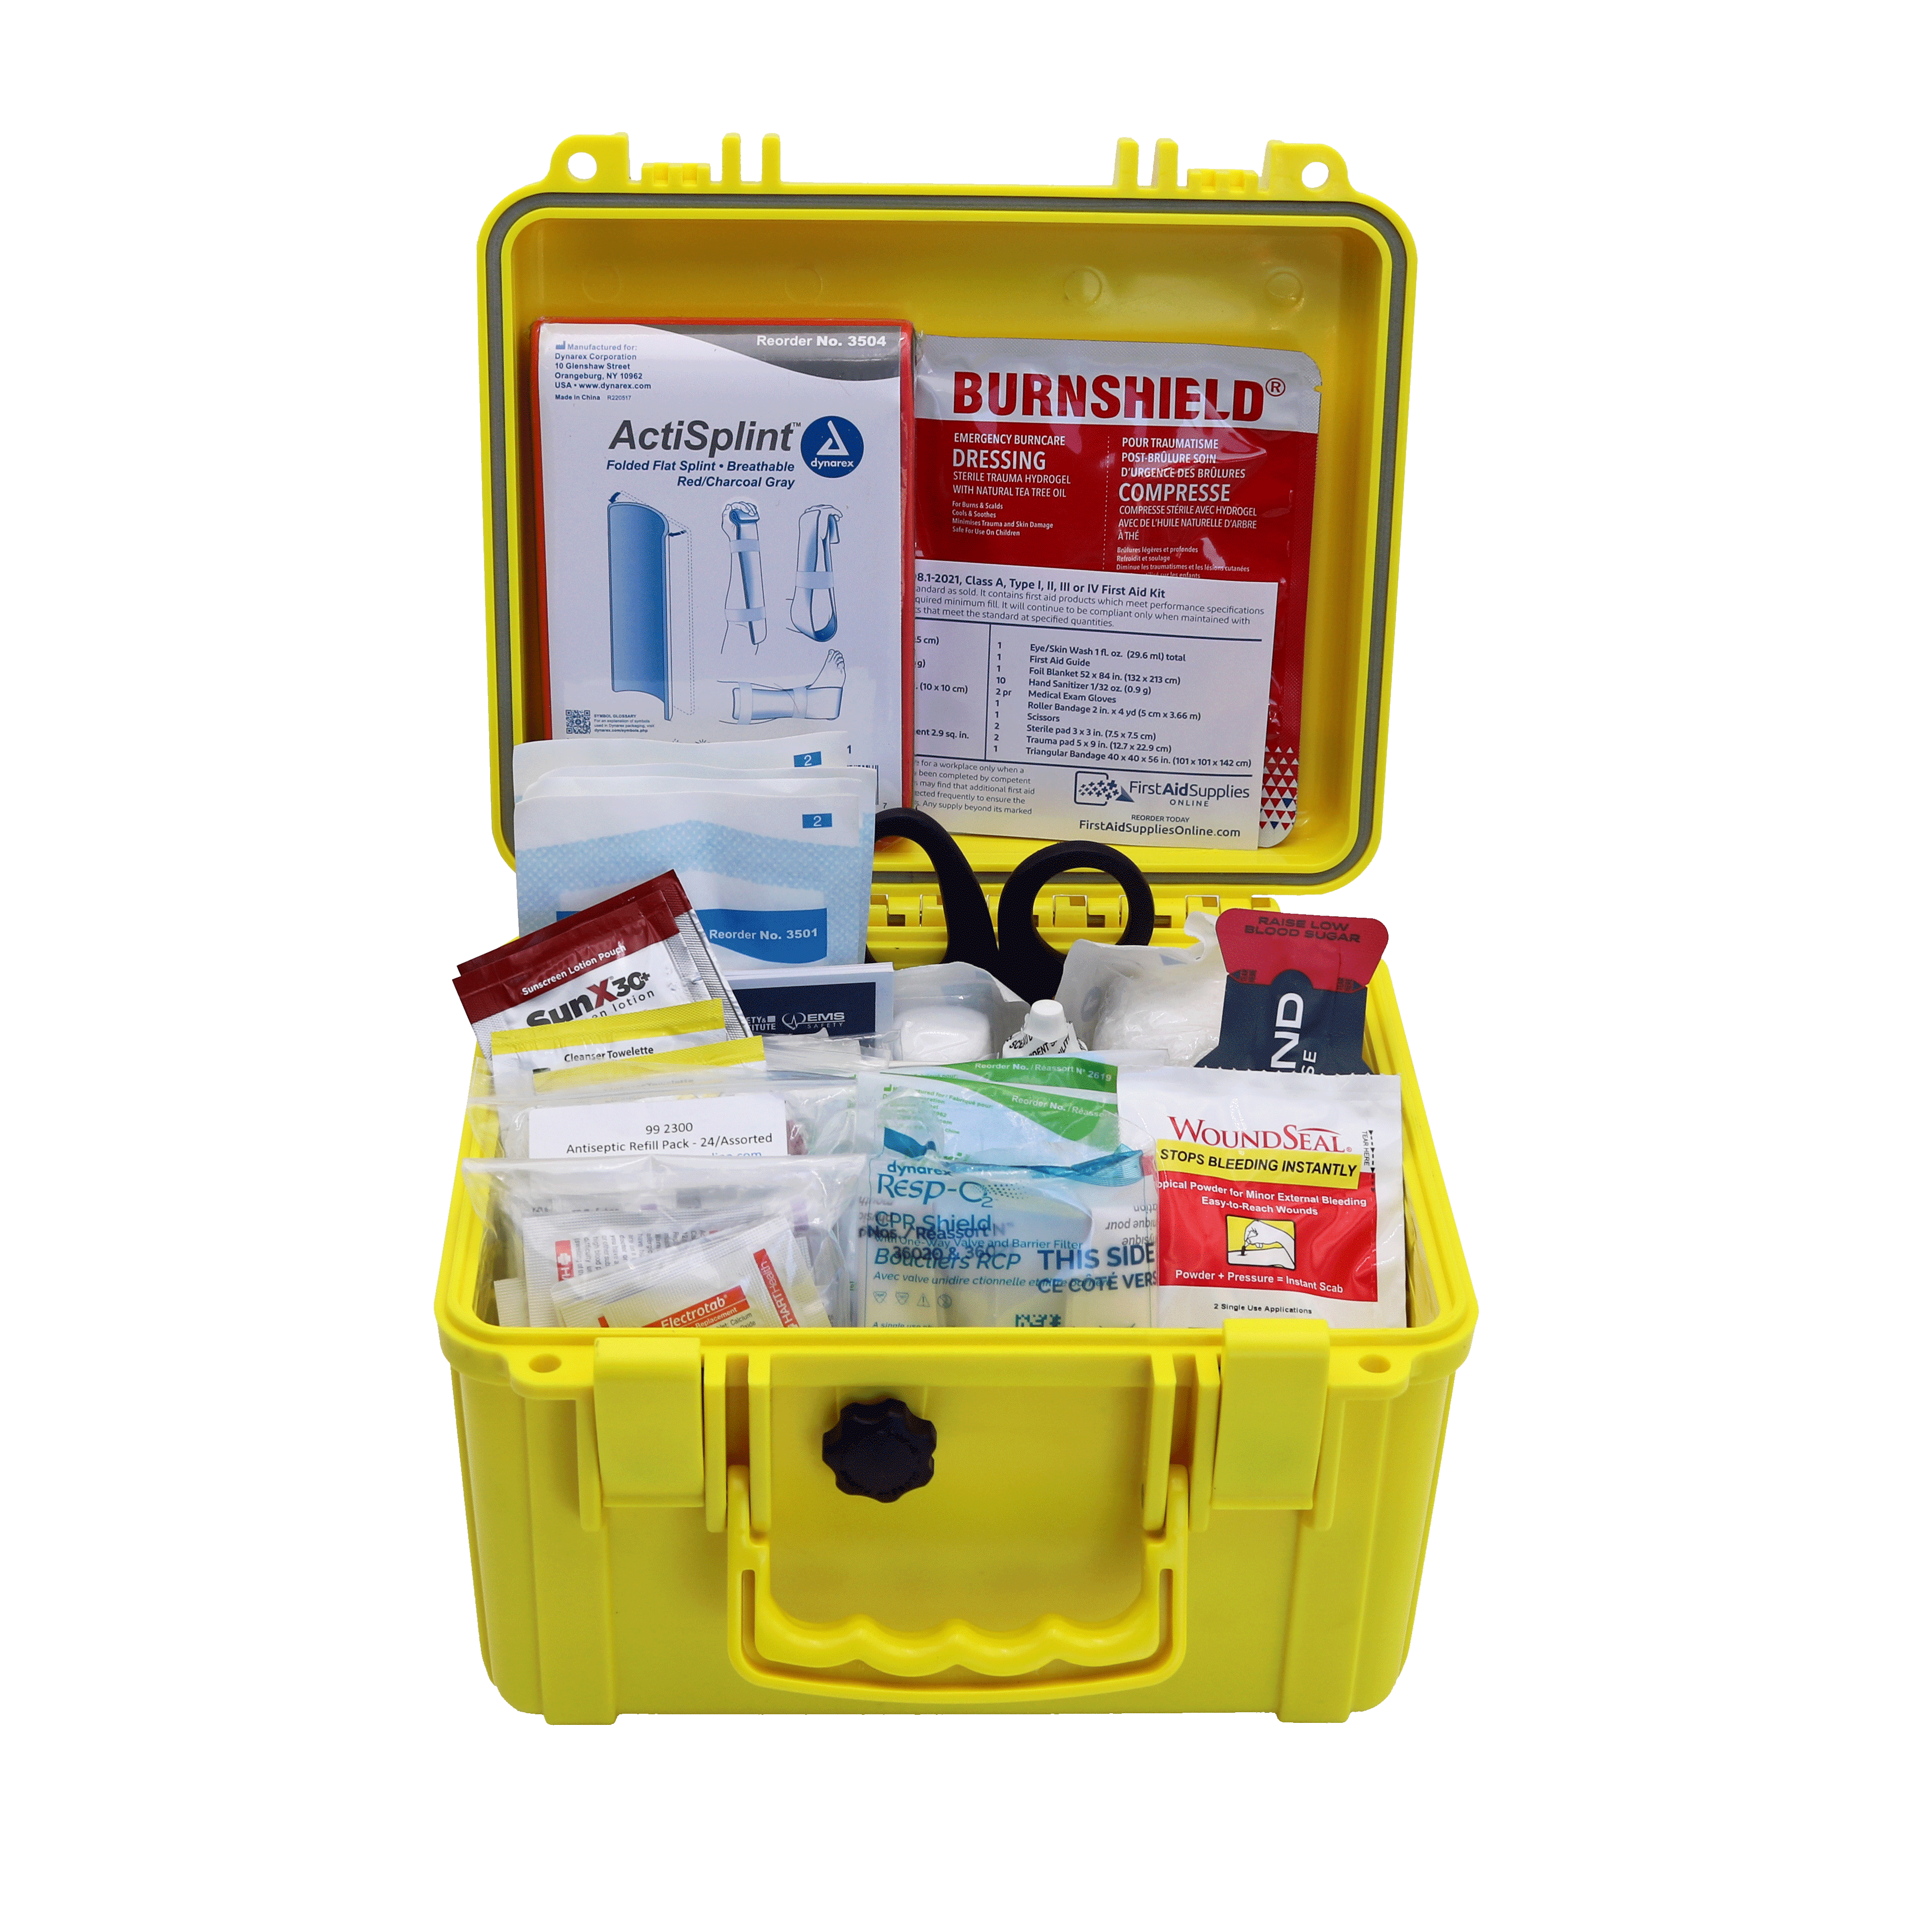 Adventure, Waterproof, Small First Aid Kit - Indestructible